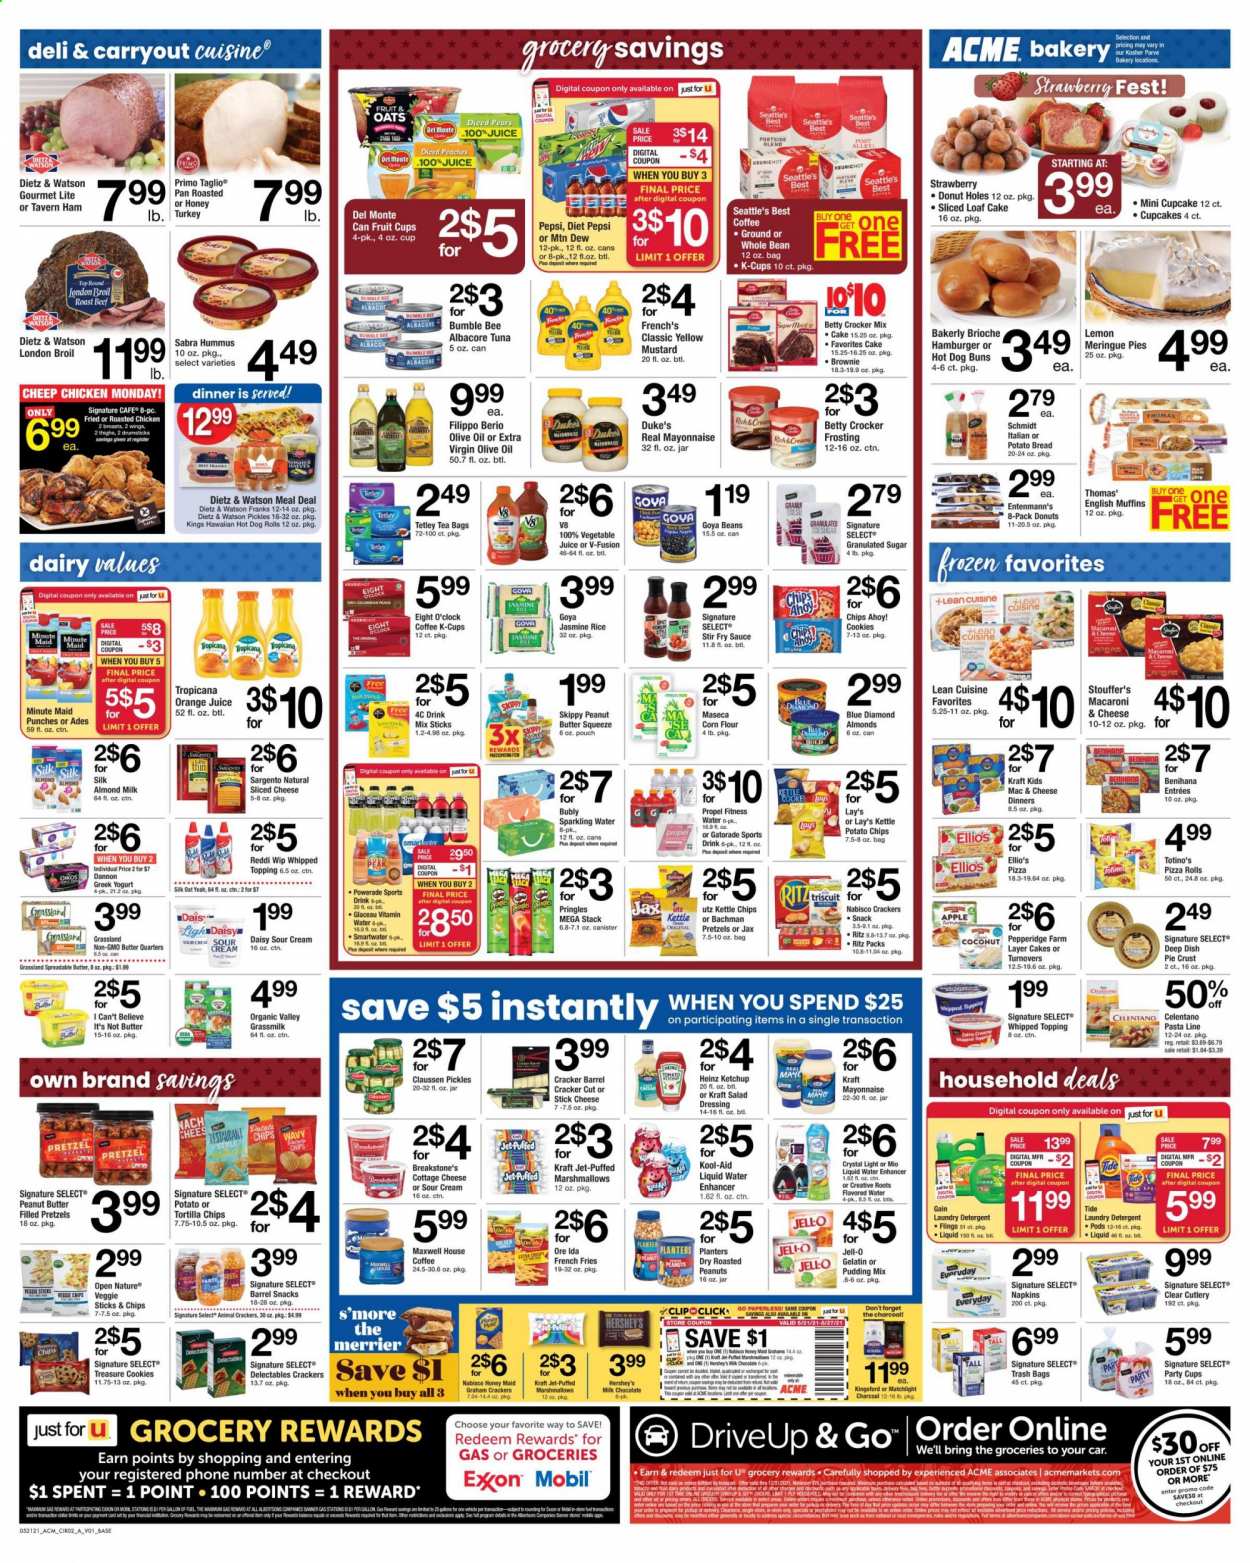 thumbnail - ACME Flyer - 05/21/2021 - 05/27/2021 - Sales products - fruit cup, bread, english muffins, hot dog rolls, pretzels, cake, pizza rolls, buns, brioche, turnovers, cupcake, donut holes, brownies, loaf cake, Entenmann's, corn, pears, coconut, tuna, pizza, chicken roast, pasta, Bumble Bee, sauce, Lean Cuisine, Kraft®, ham, Dietz & Watson, hummus, cottage cheese, sliced cheese, Sargento, greek yoghurt, pudding, yoghurt, Oikos, Dannon, almond milk, spreadable butter, I Can't Believe It's Not Butter, sour cream, mayonnaise, Hershey's, cheese sticks, Stouffer's, potato fries, french fries, Ore-Ida, cookies, graham crackers, marshmallows, milk chocolate, chocolate, snack, crackers, Chips Ahoy!, RITZ, tortilla chips, potato chips, Pringles, Lay’s, frosting, granulated sugar, sugar, pie crust, corn flour, topping, Jell-O, Heinz, pickles, Goya, Honey Maid, rice, jasmine rice, mustard, salad dressing, ketchup, dressing, olive oil, peanut butter, roasted peanuts, peanuts, Planters, Blue Diamond, Mountain Dew, Powerade, Pepsi, orange juice, juice, Diet Pepsi, Gatorade, fruit punch, flavored water, sparkling water, Smartwater, Maxwell House, tea bags, coffee, coffee capsules, K-Cups, Eight O'Clock, beef meat, roast beef, napkins, detergent, Gain, Tide, laundry detergent, Jet, trash bags, pan, party cups, gelatin, hat. Page 4.